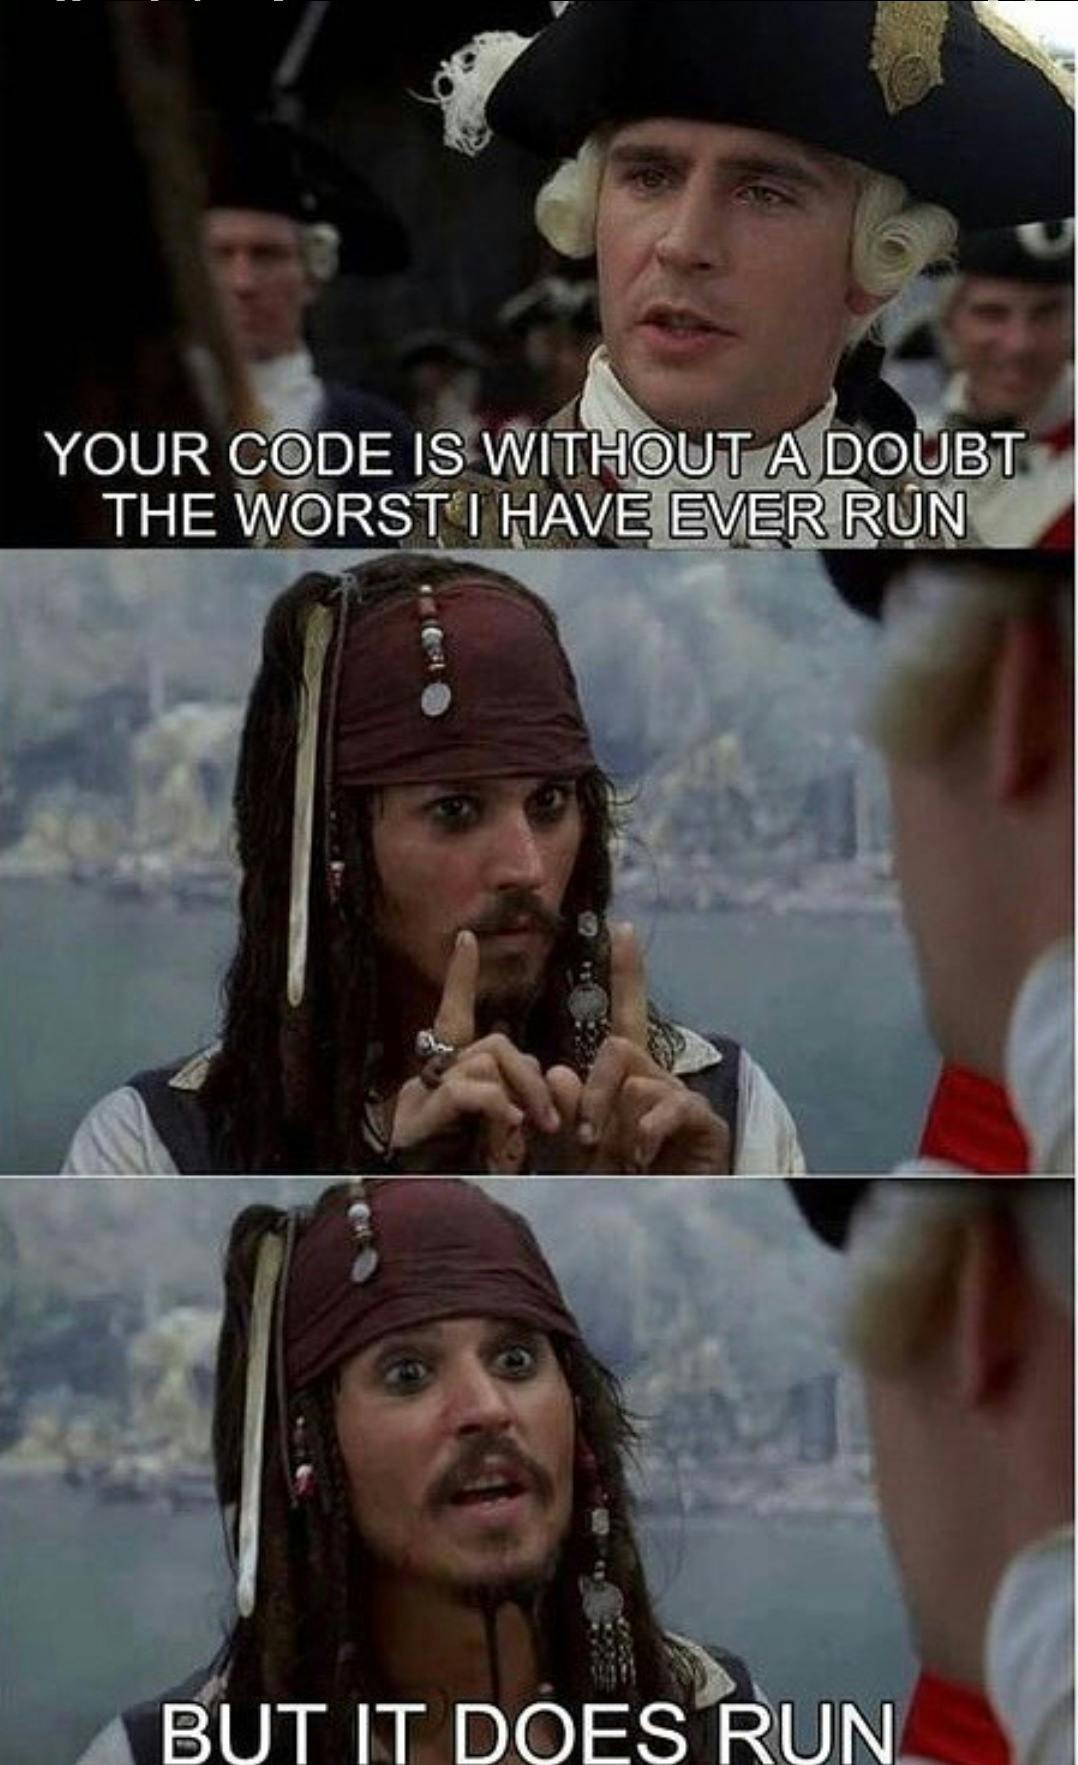 Snooty British soldier tells the pirate Jack Sparrow that his code is without a doubt the worst I've ever run and Jack Sparrow counters with "but it does run"